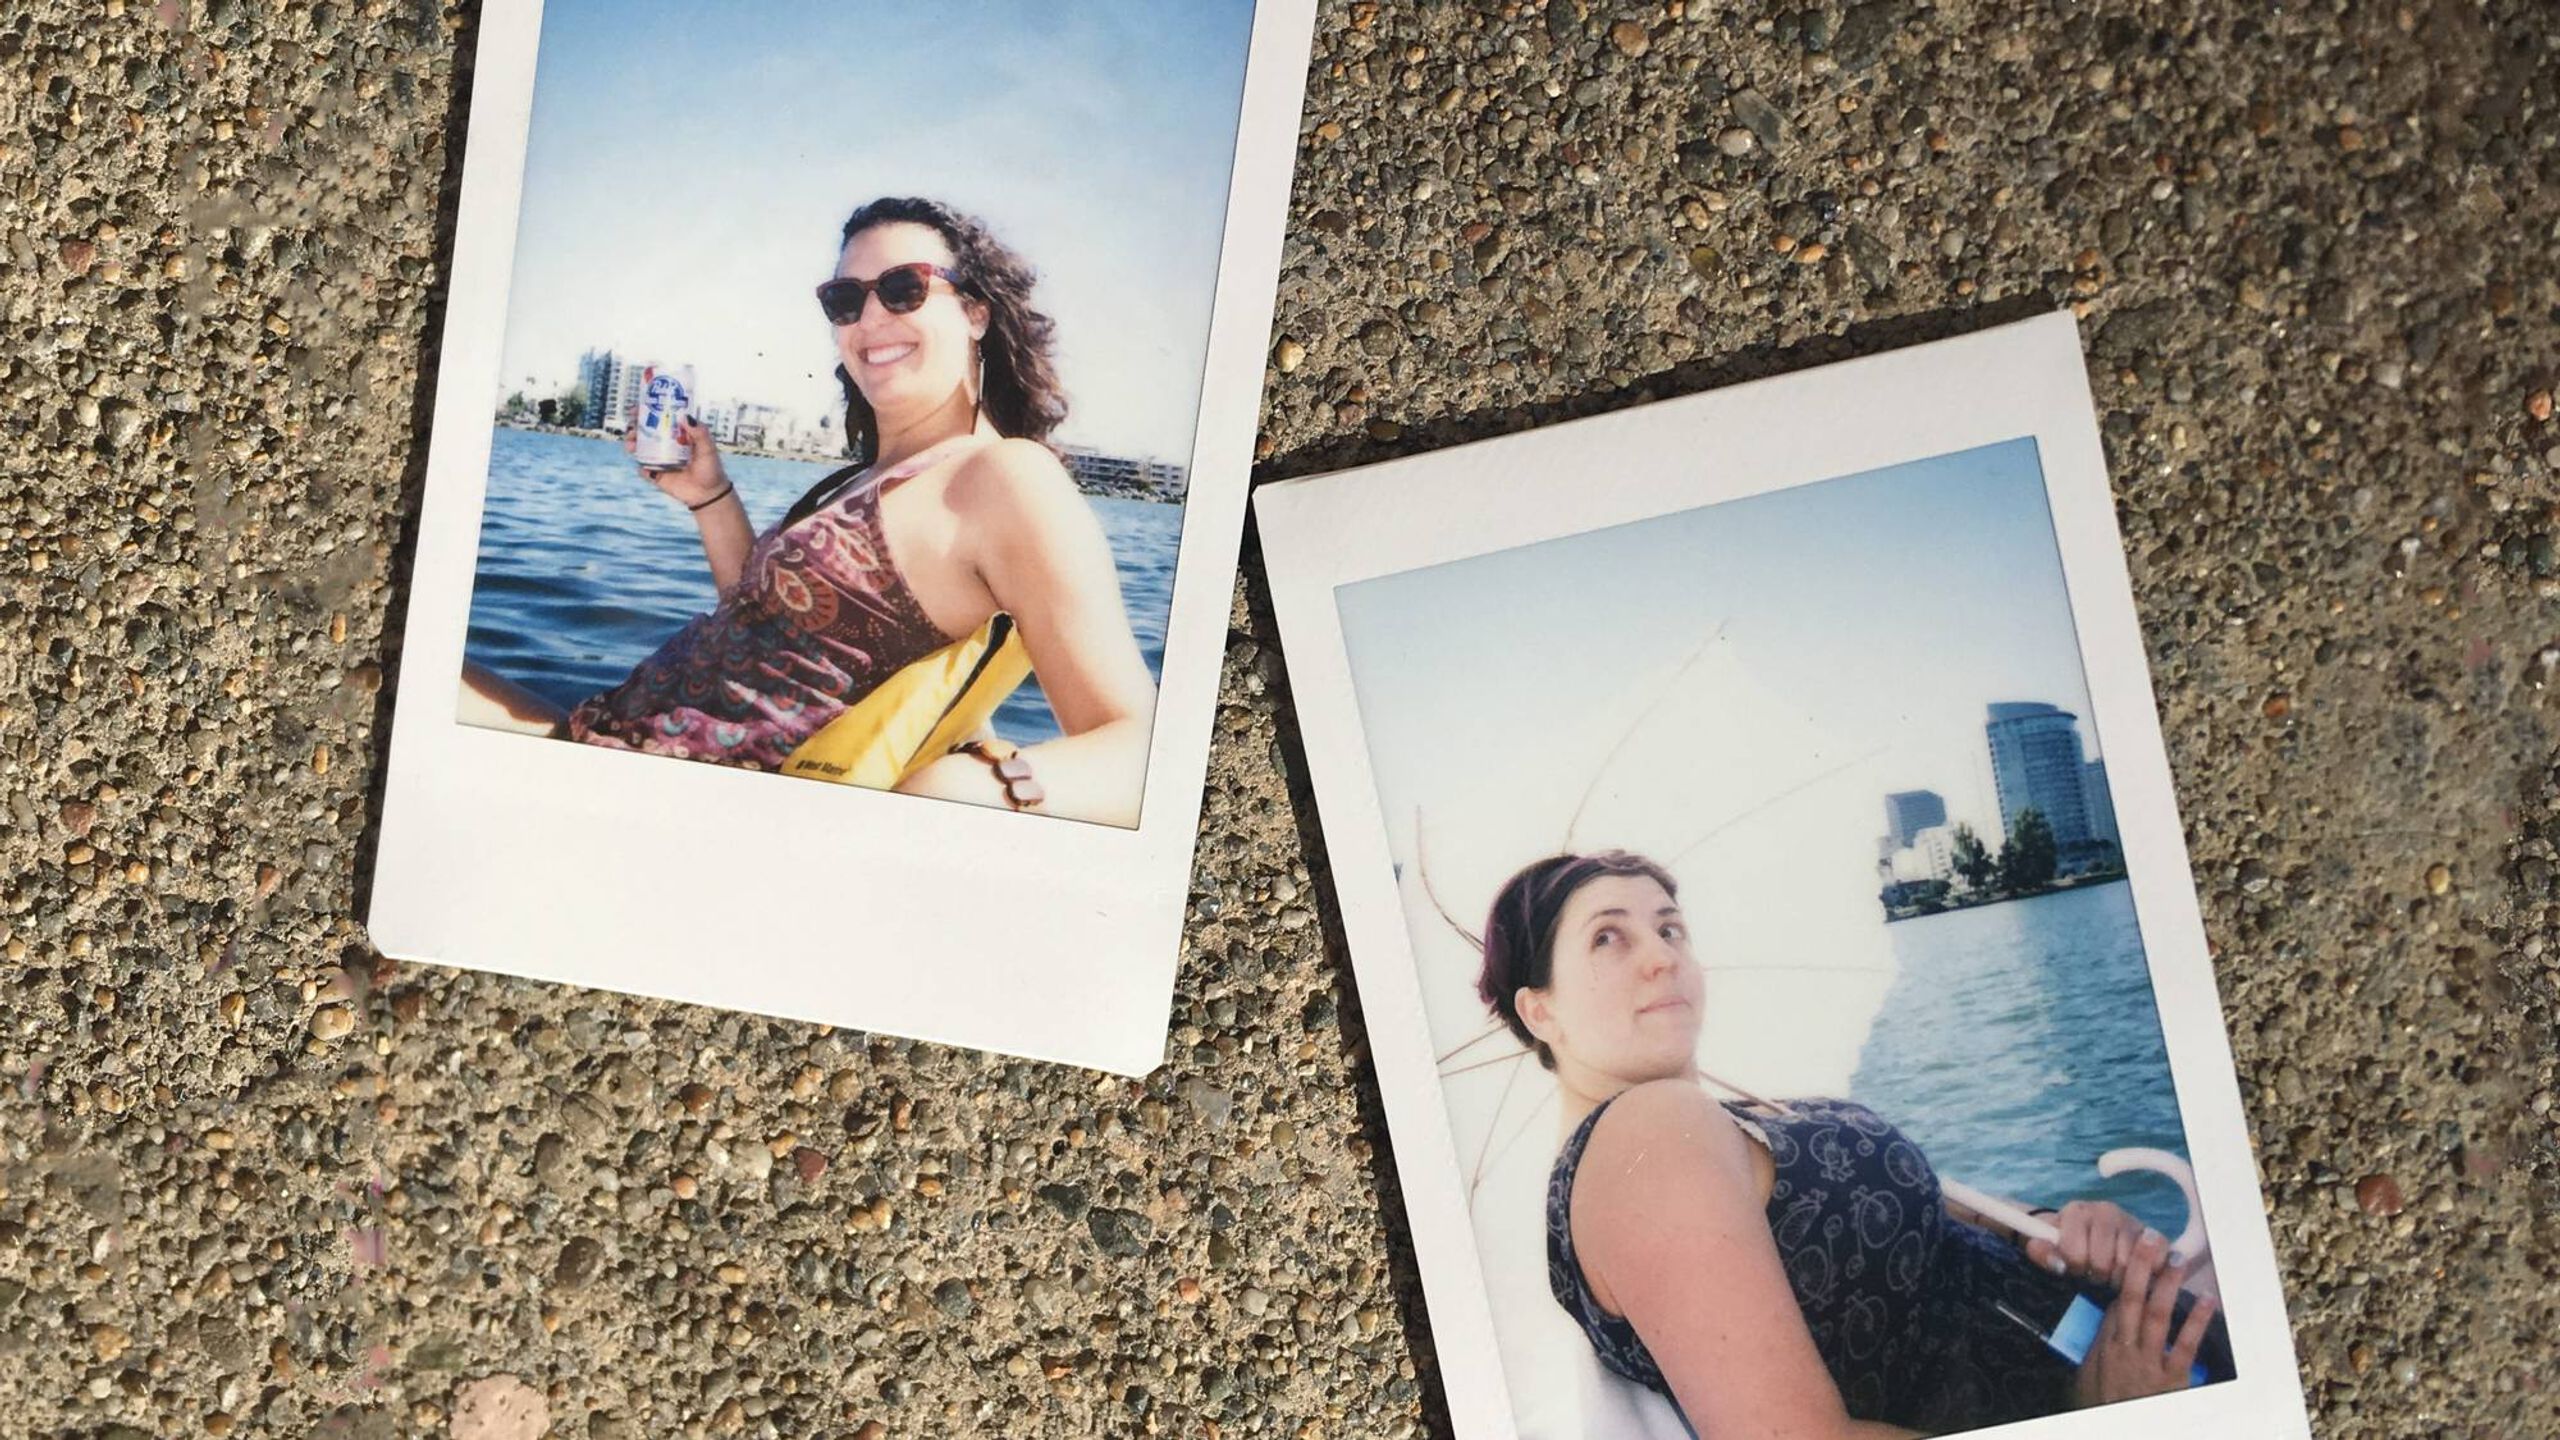 Two polaroid photos of young women sitting near the water, Rewire, Instant Messaging, friendship